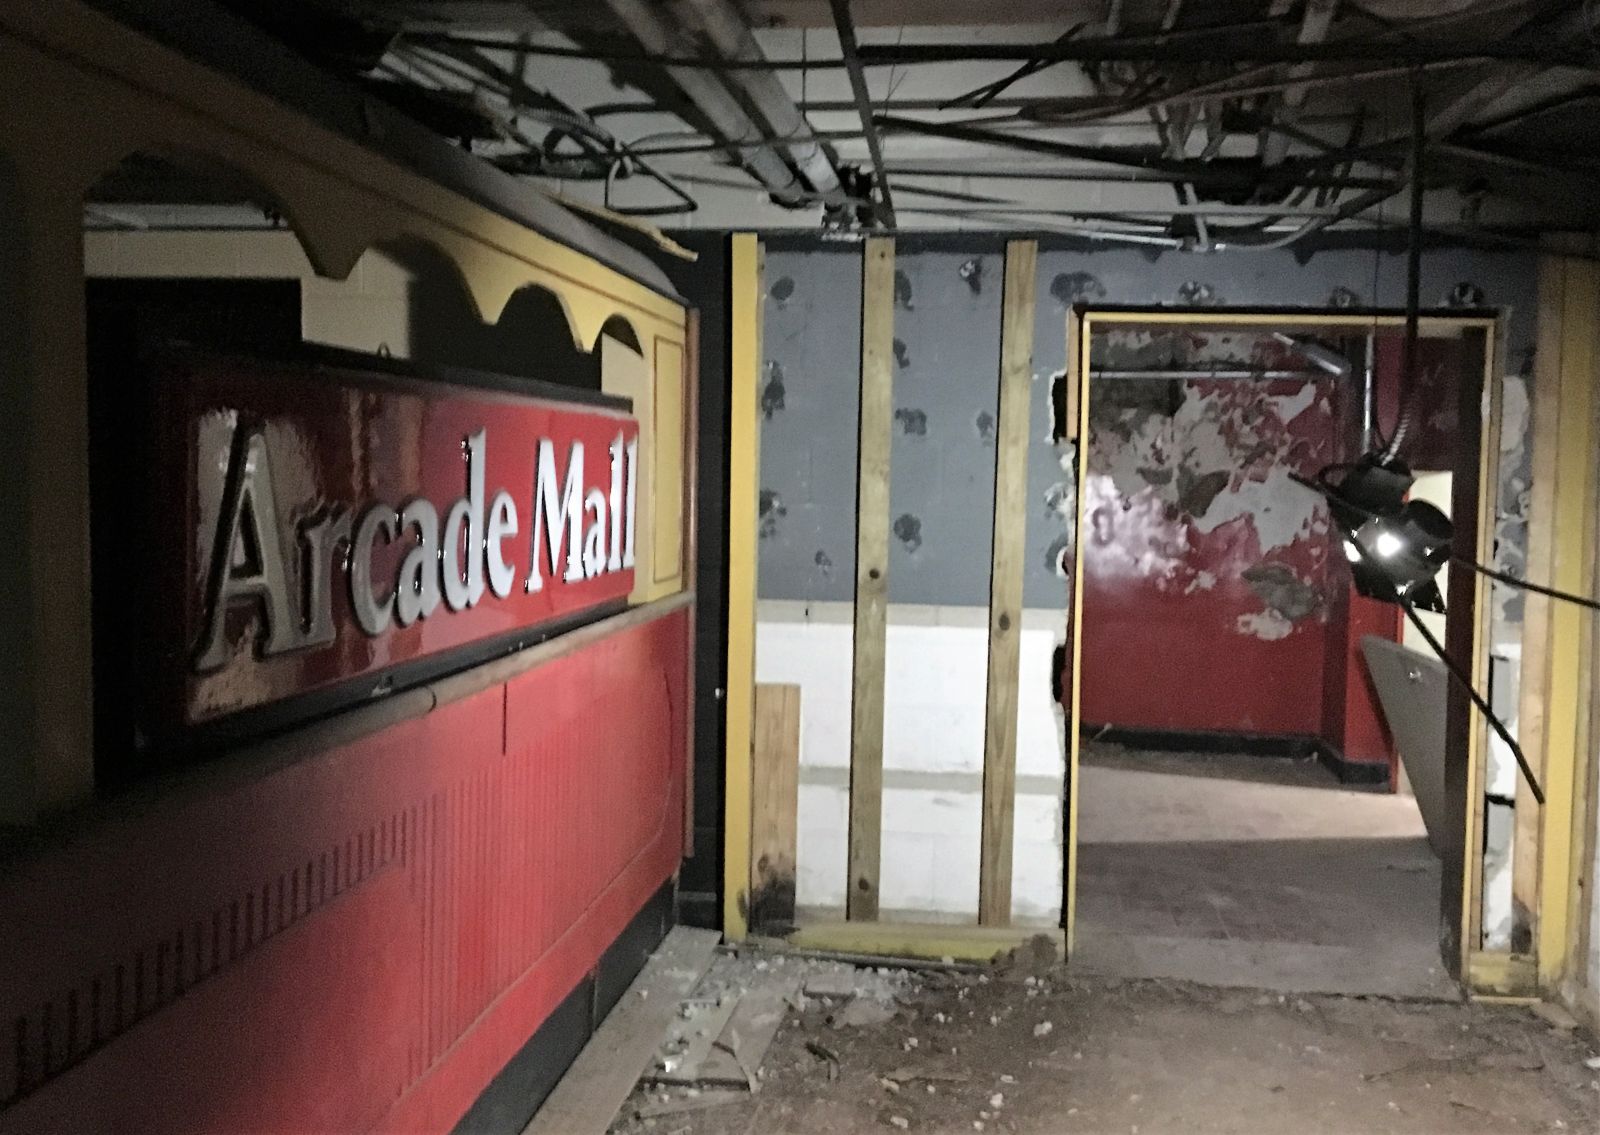 The basement of the Arcade Mall building at Main and Washington streets contains remnants of its 1970s past as Columbia Down Under. (Photo/Melinda Waldrop)